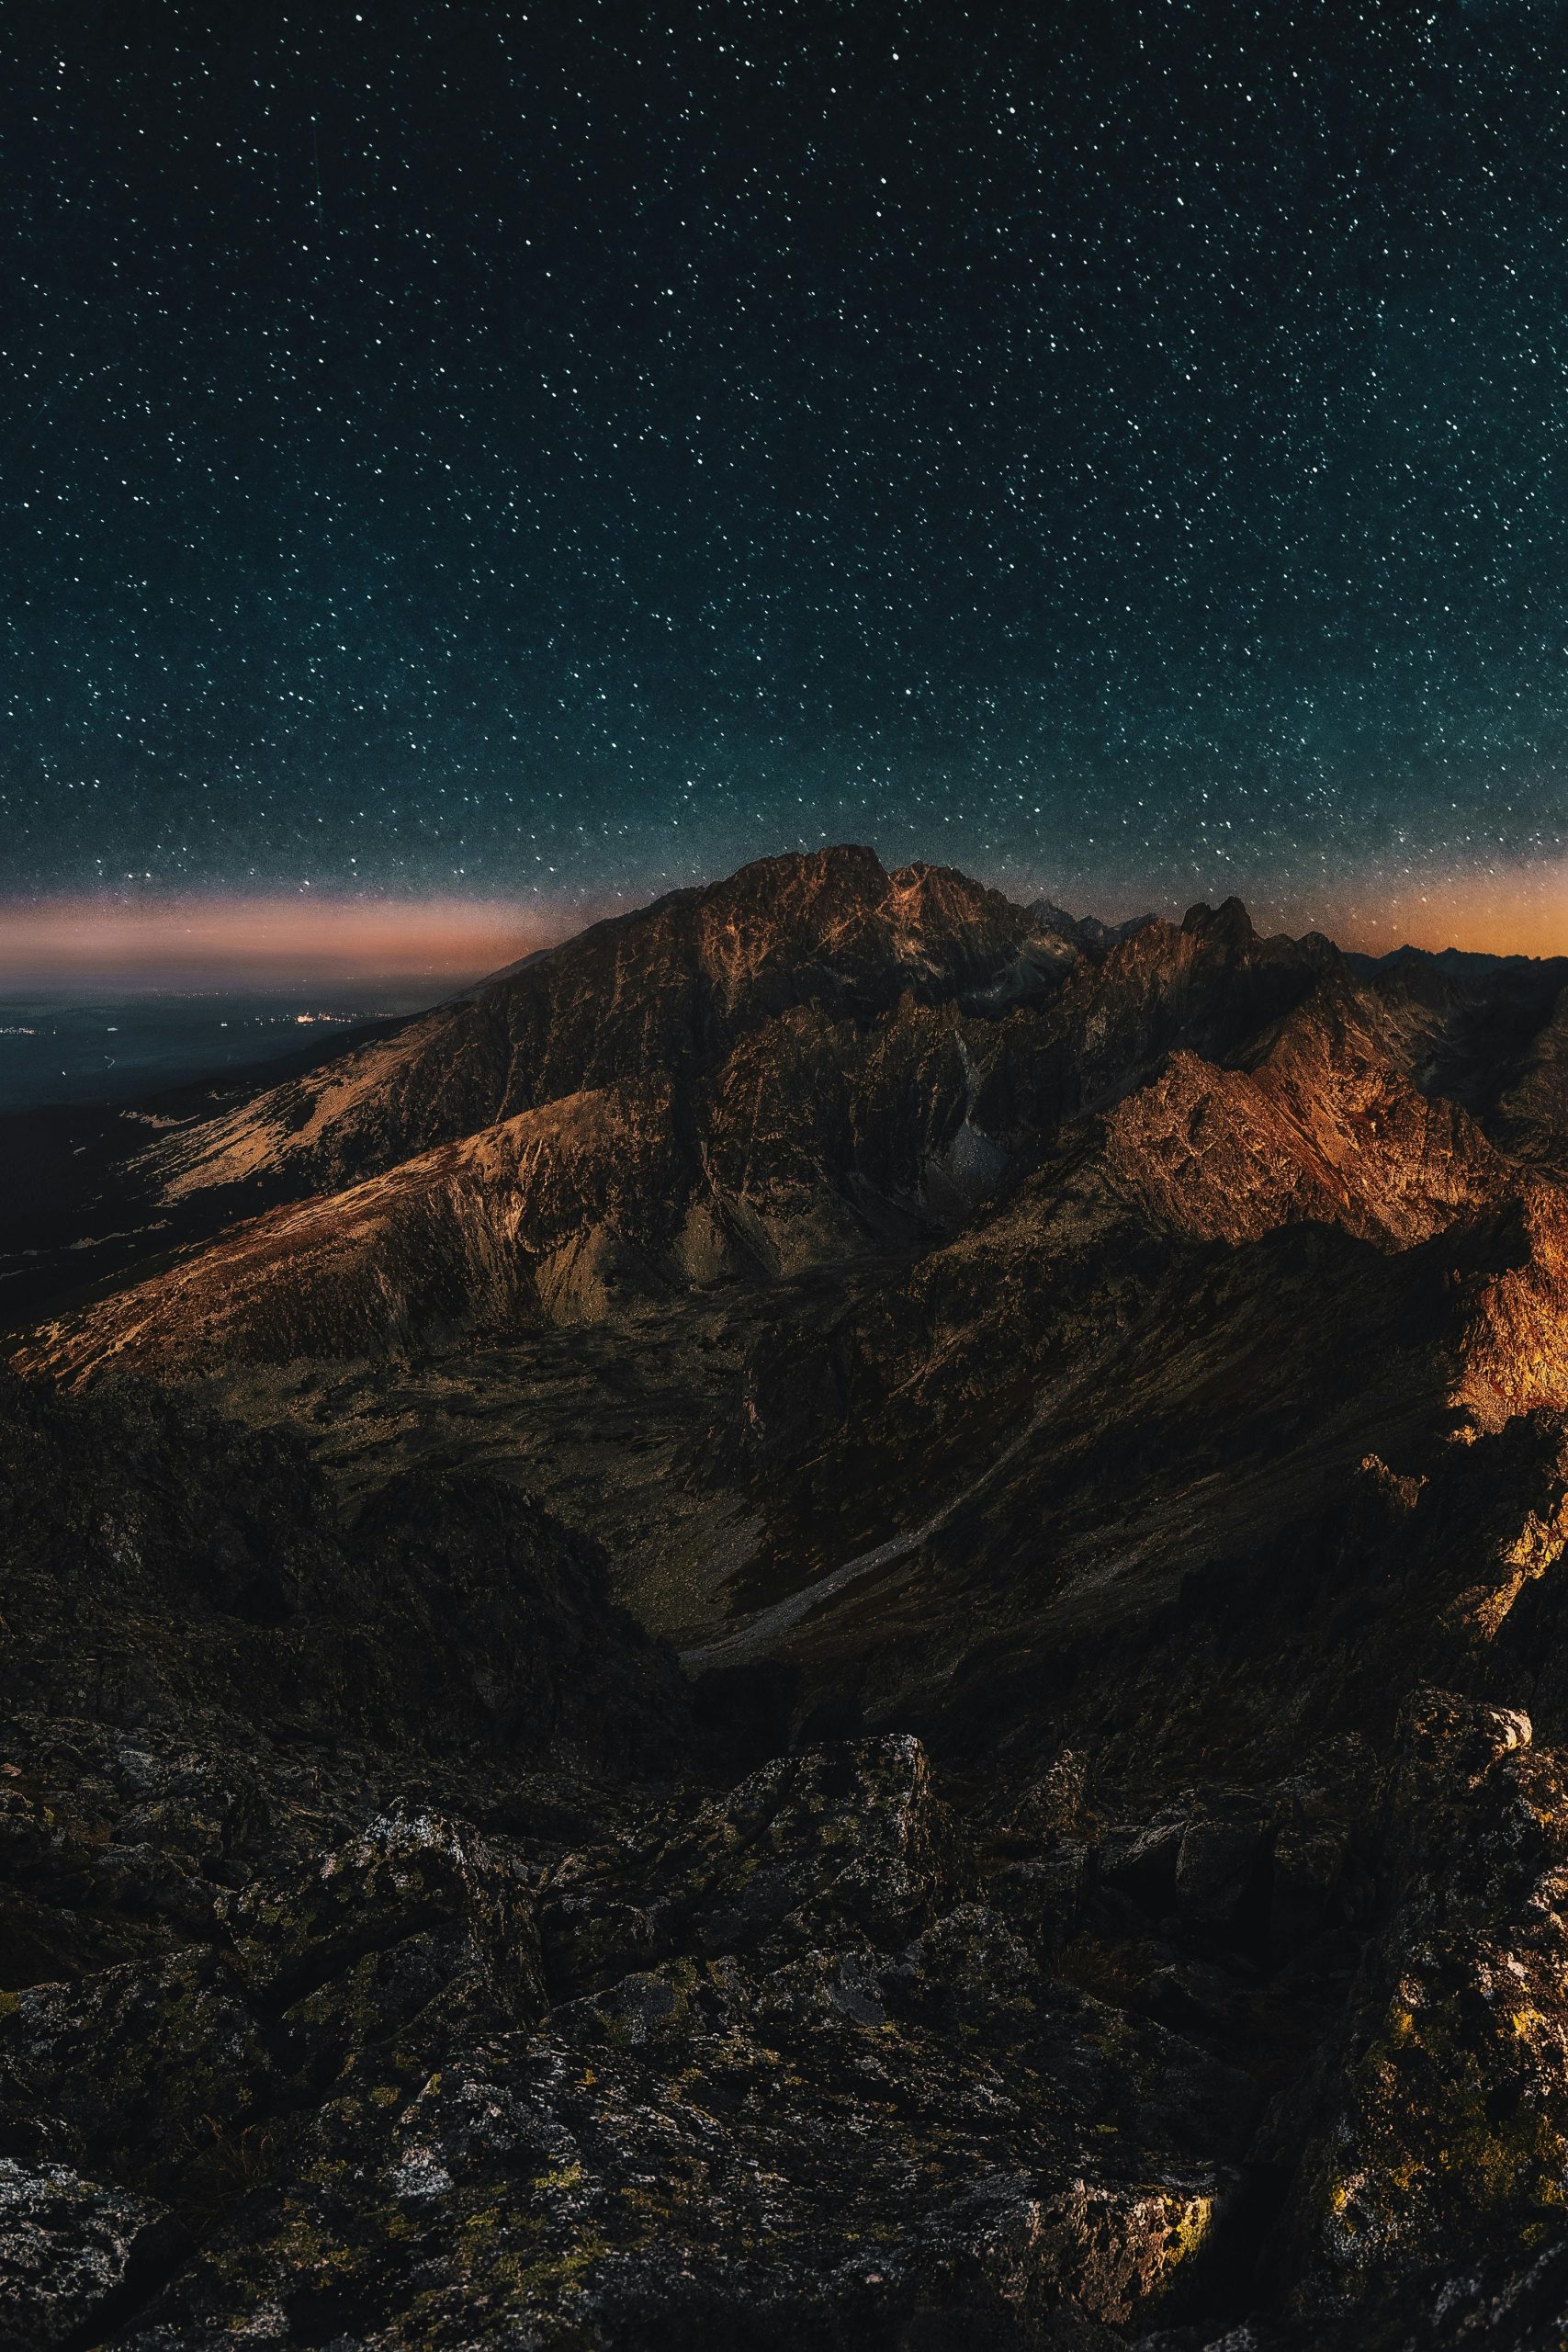 Mountain At Night Under A Starry Sky